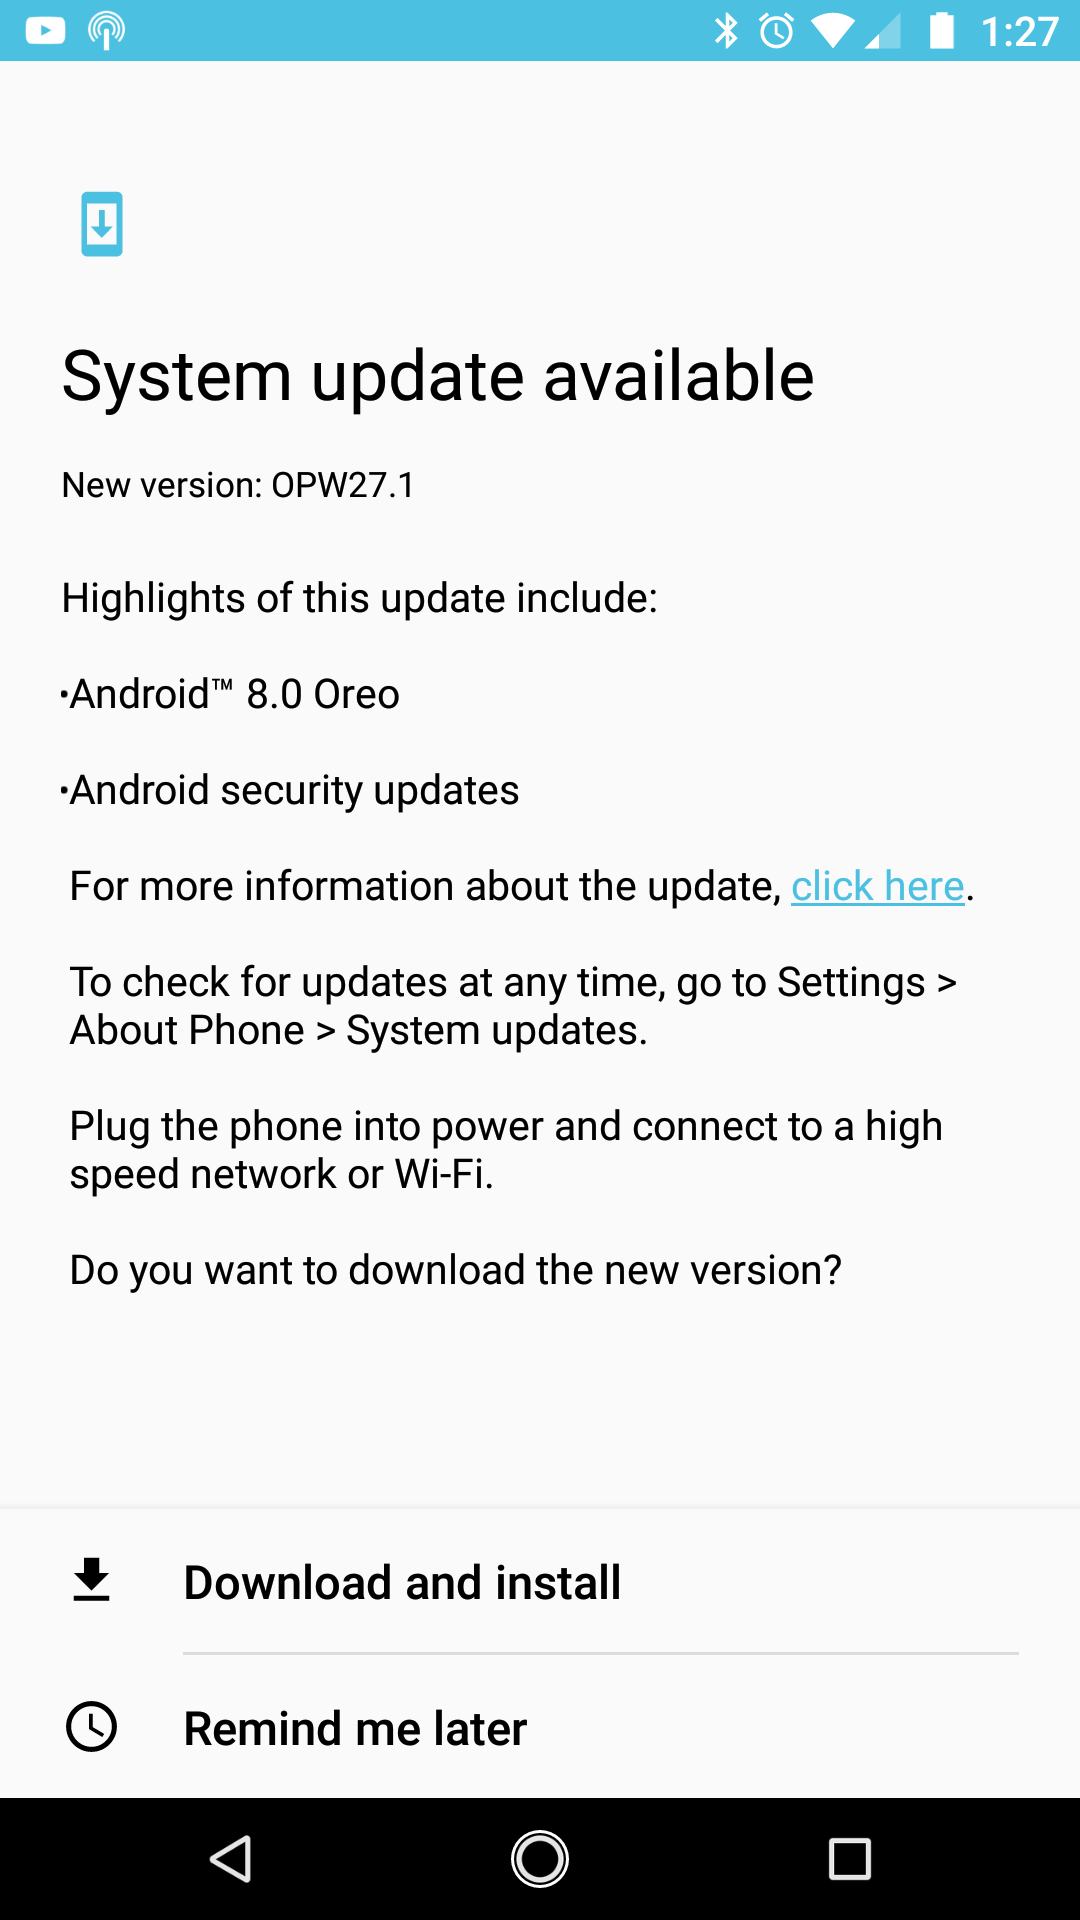 moto x4 android one edition getting android oreo 8.0